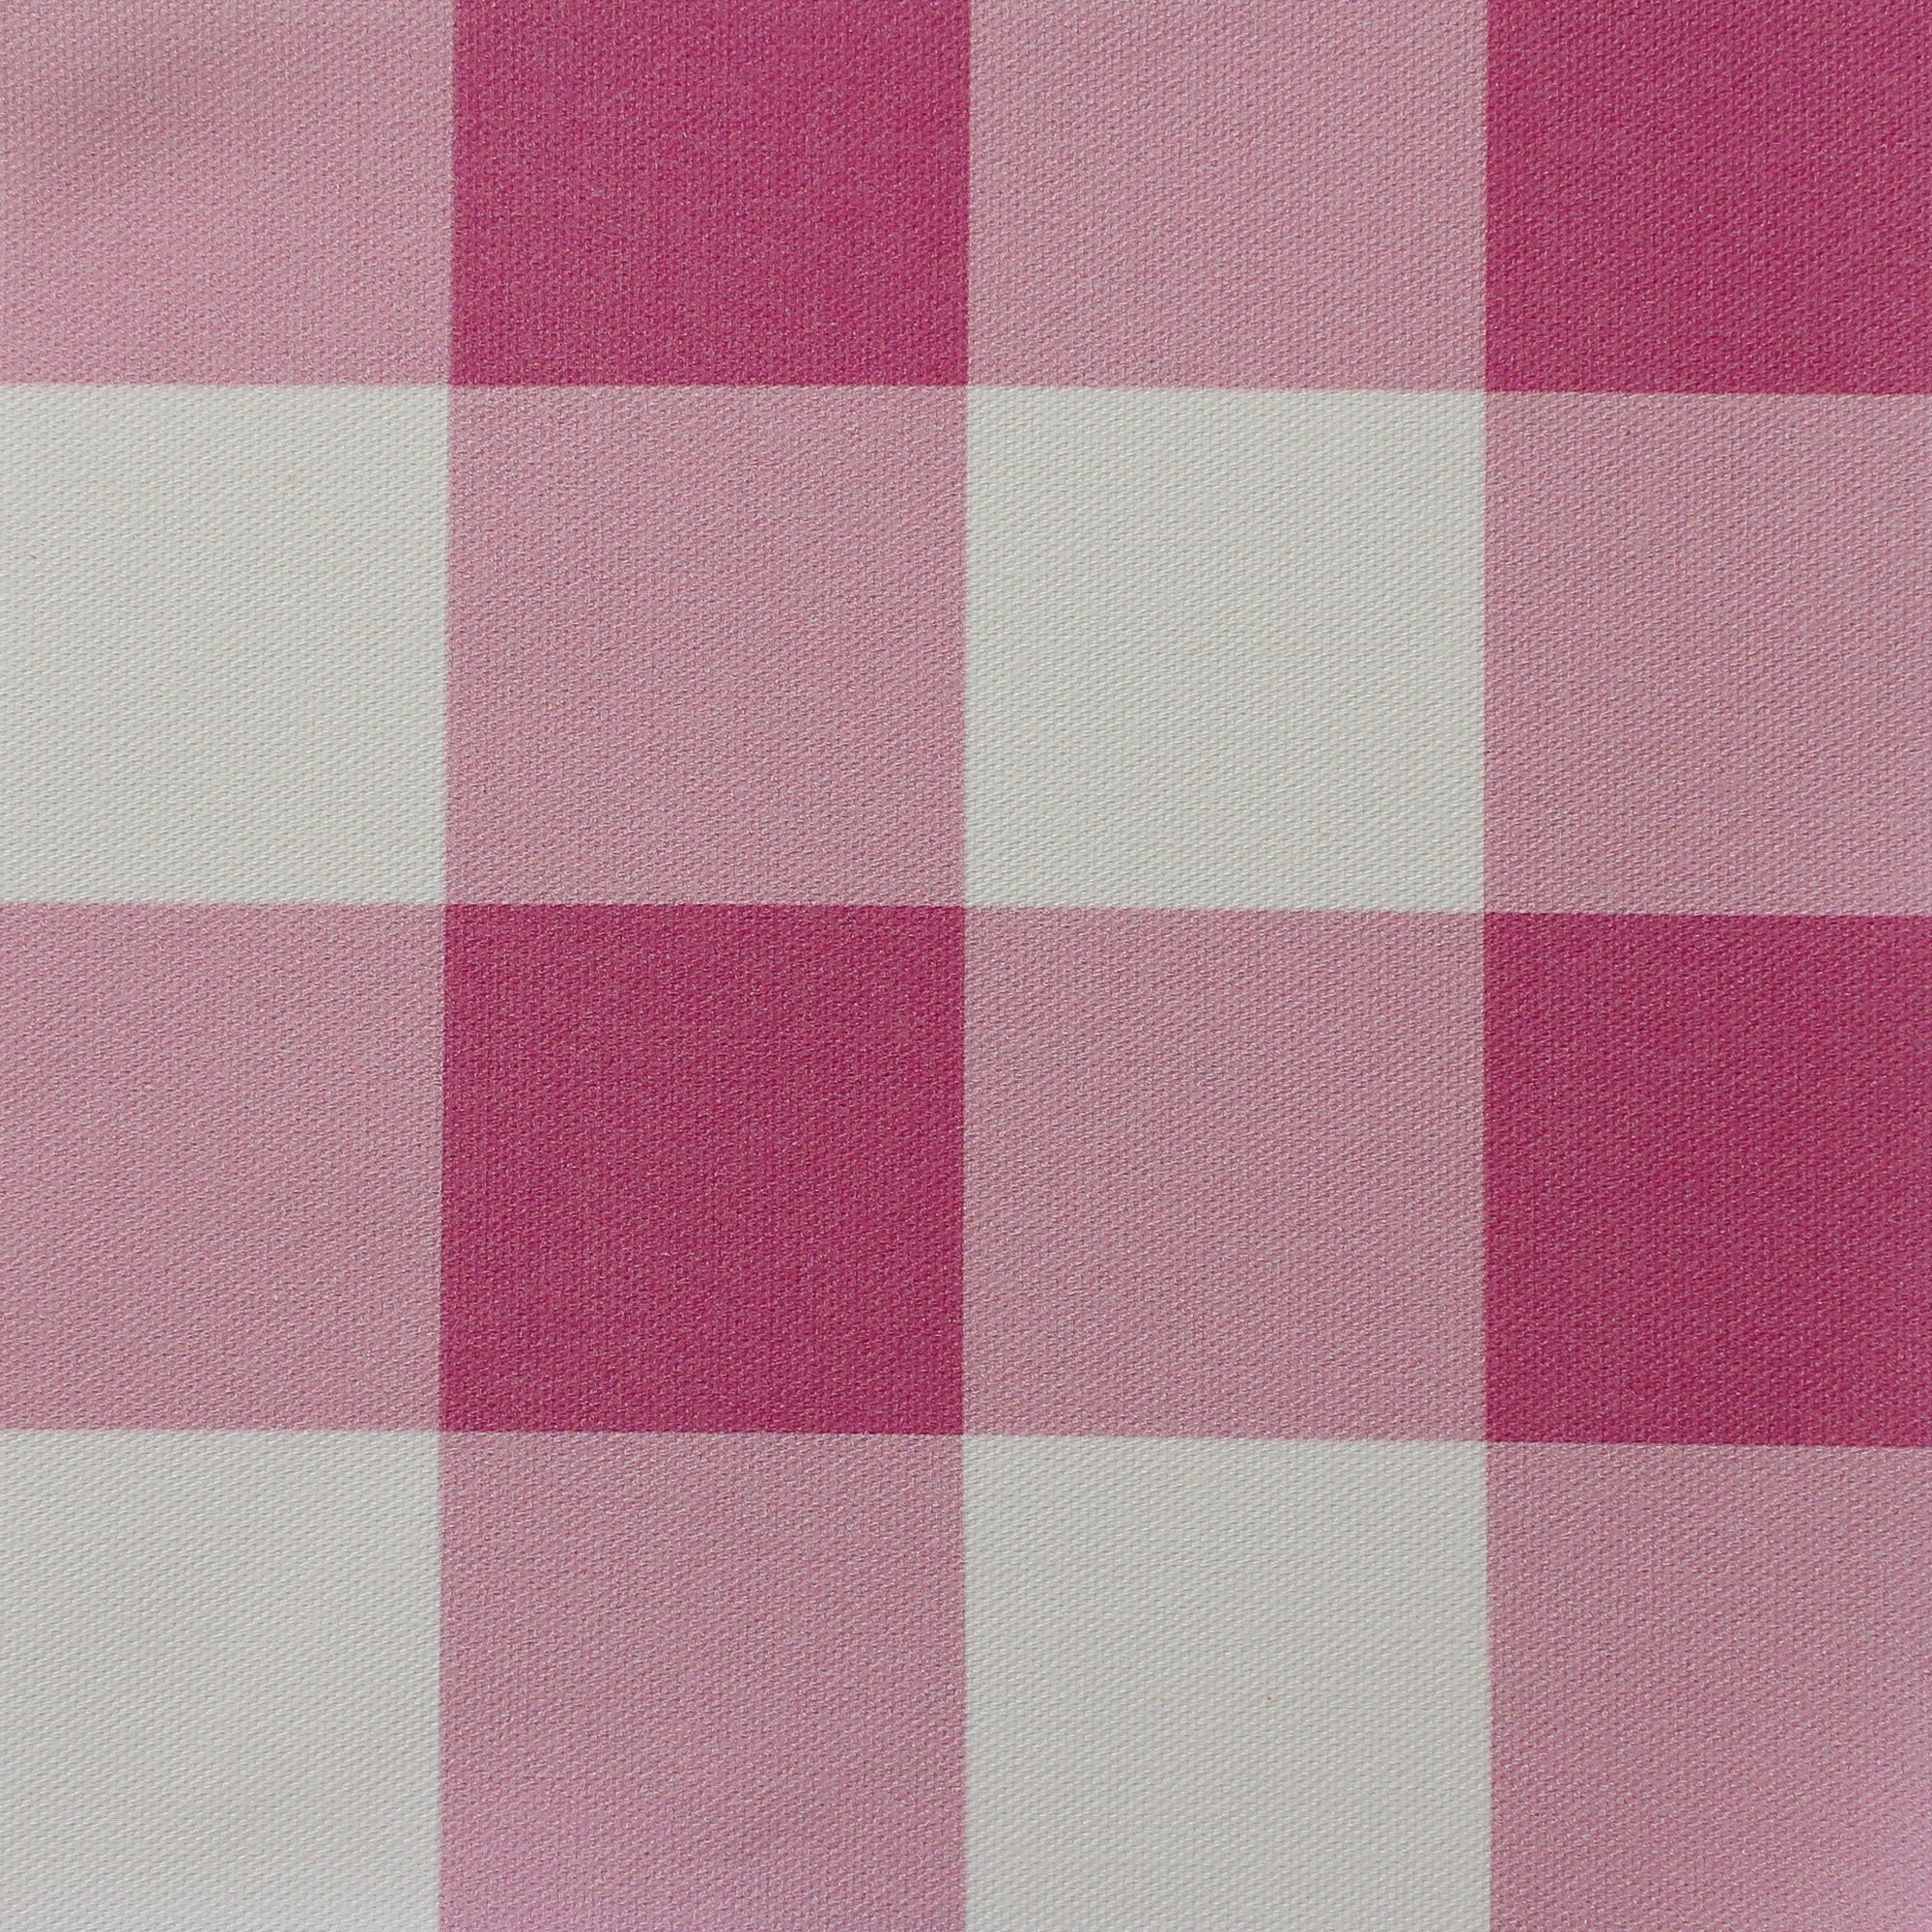 Vintage 1.5 French Candy Pink White Checked Gingham Jacquard